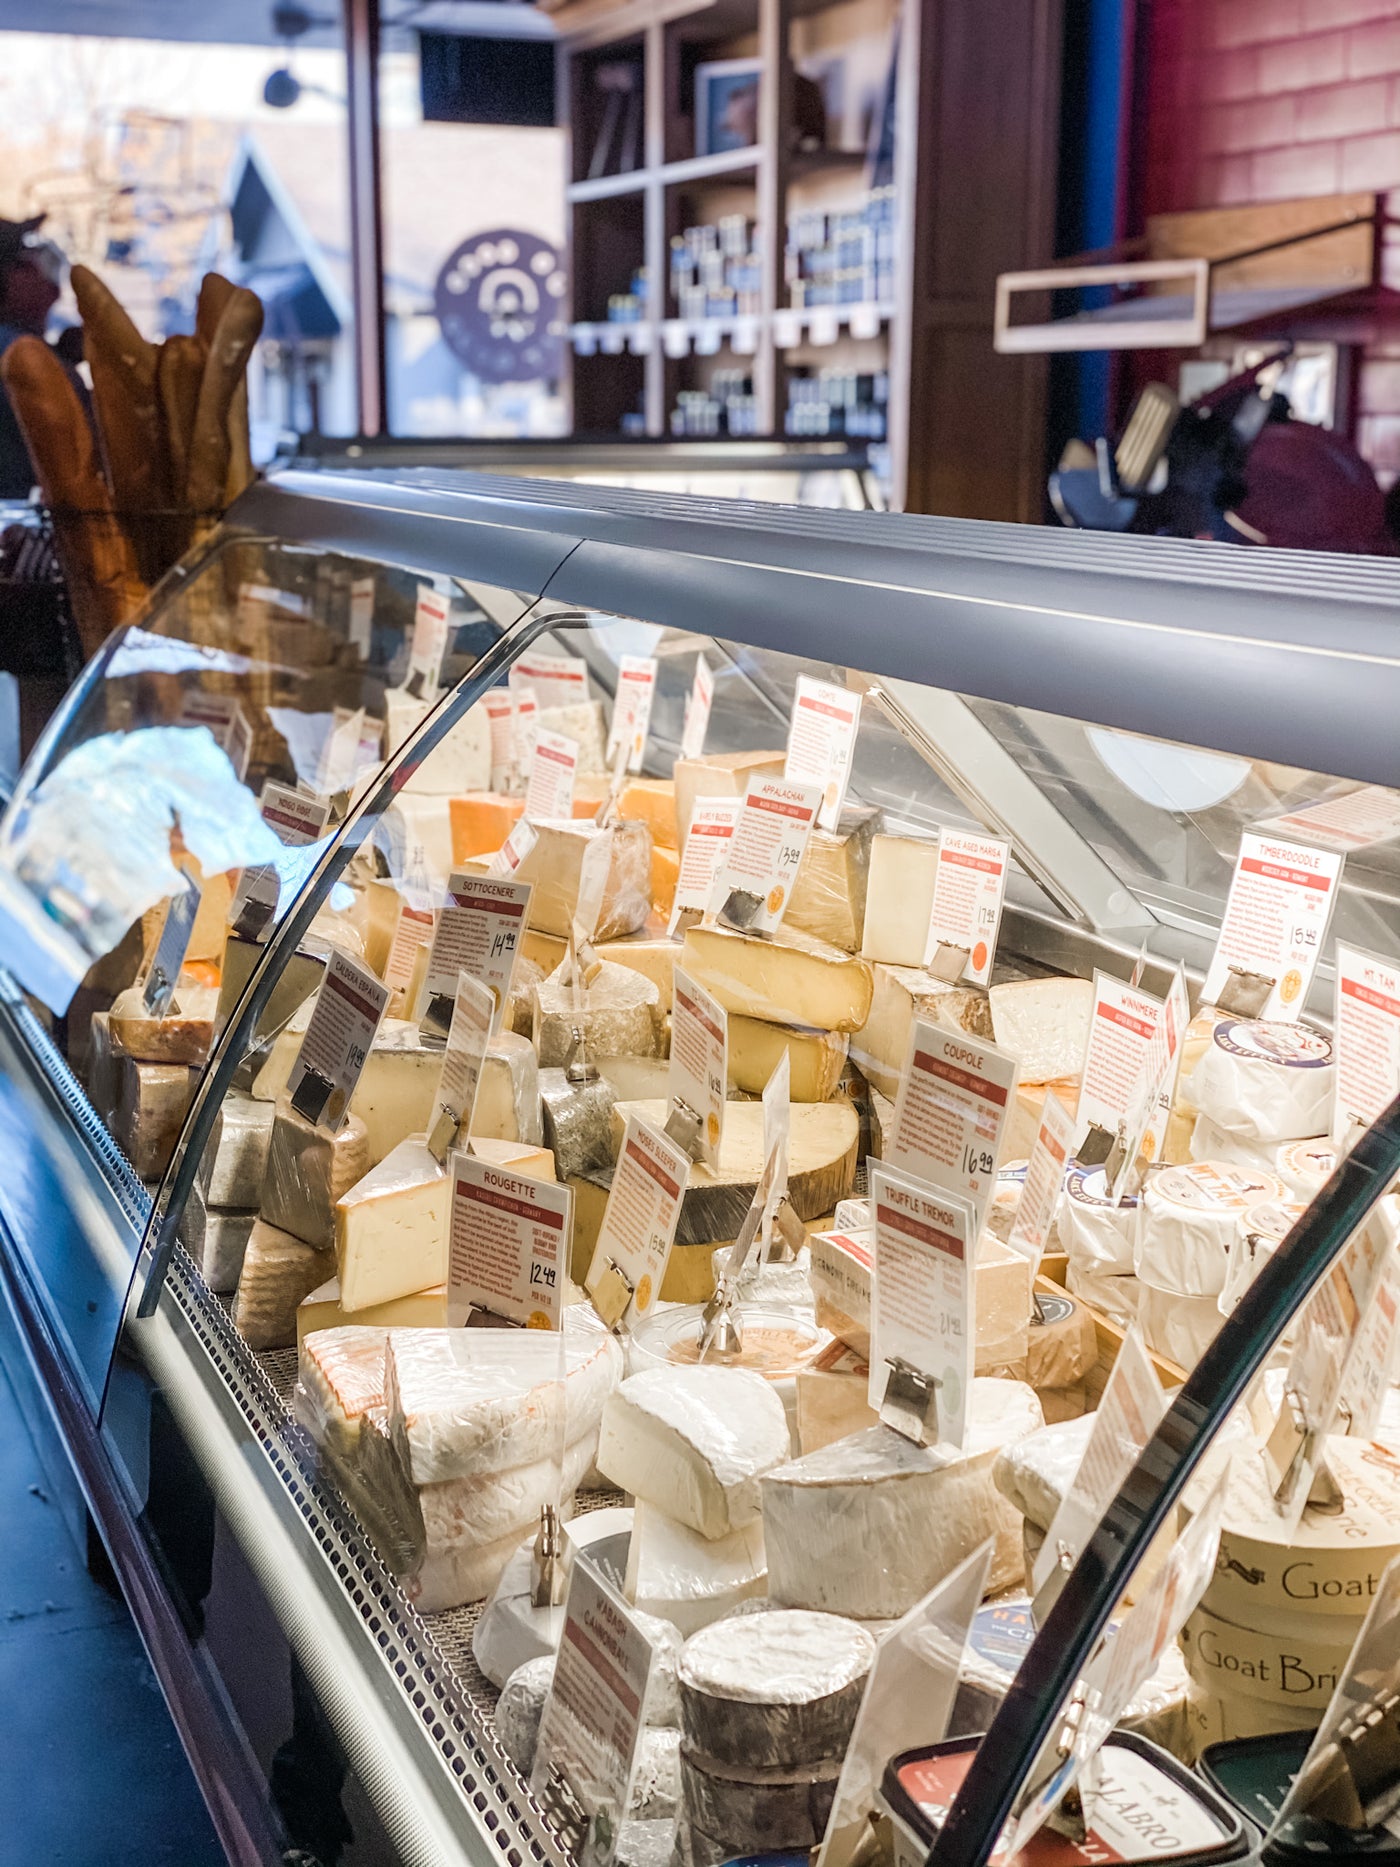 What is a "Cheesemonger"?